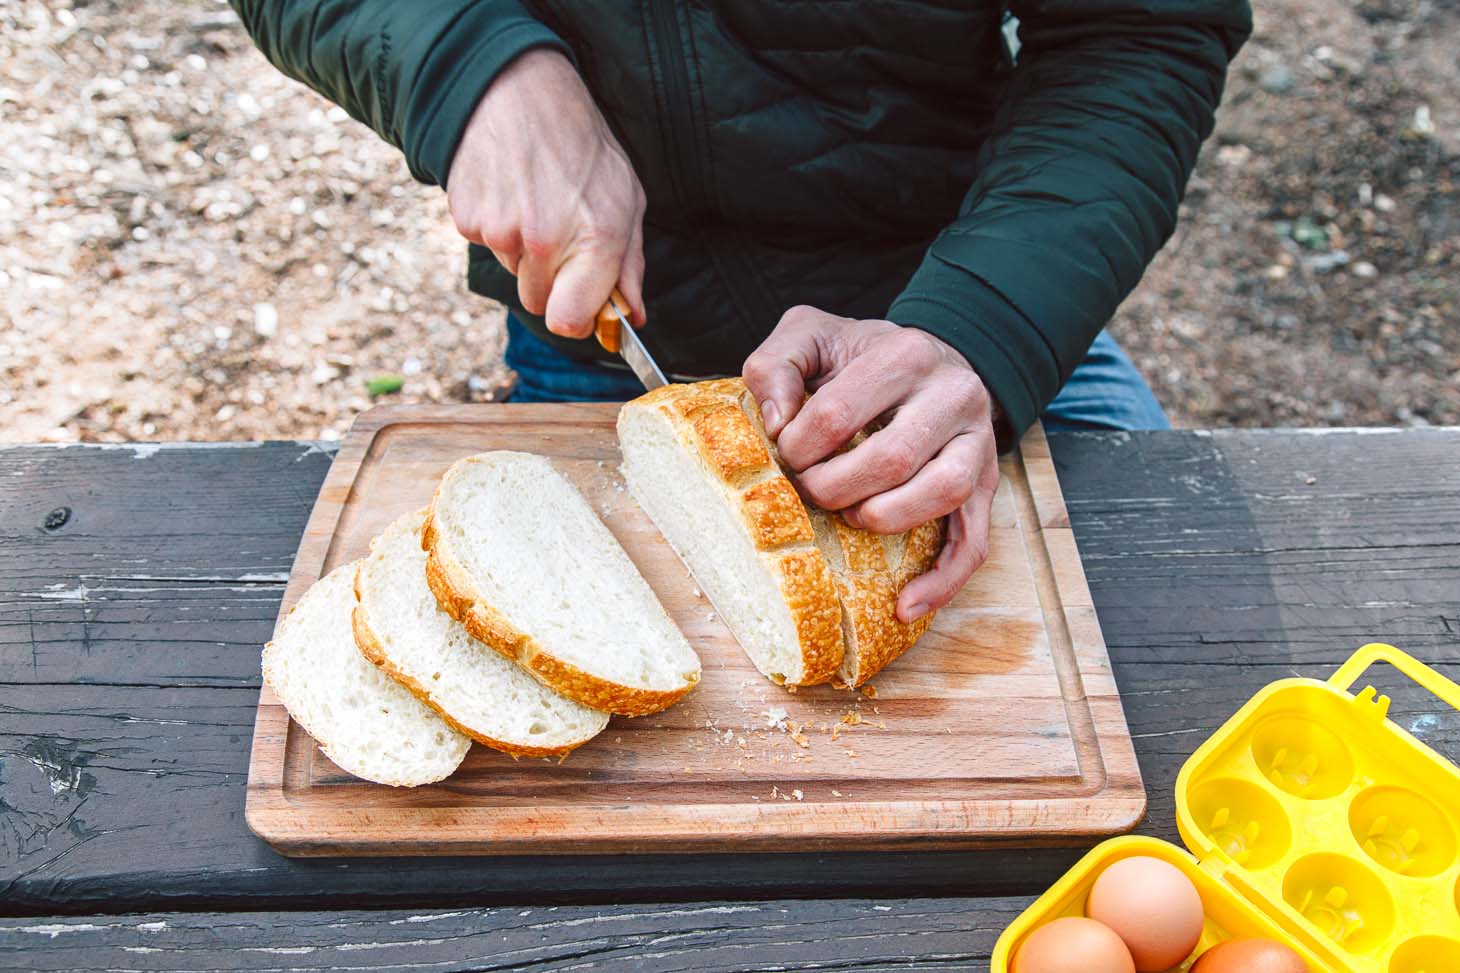 https://www.freshoffthegrid.com/wp-content/uploads/2017/08/how-to-make-french-toast-while-camping-6.jpg